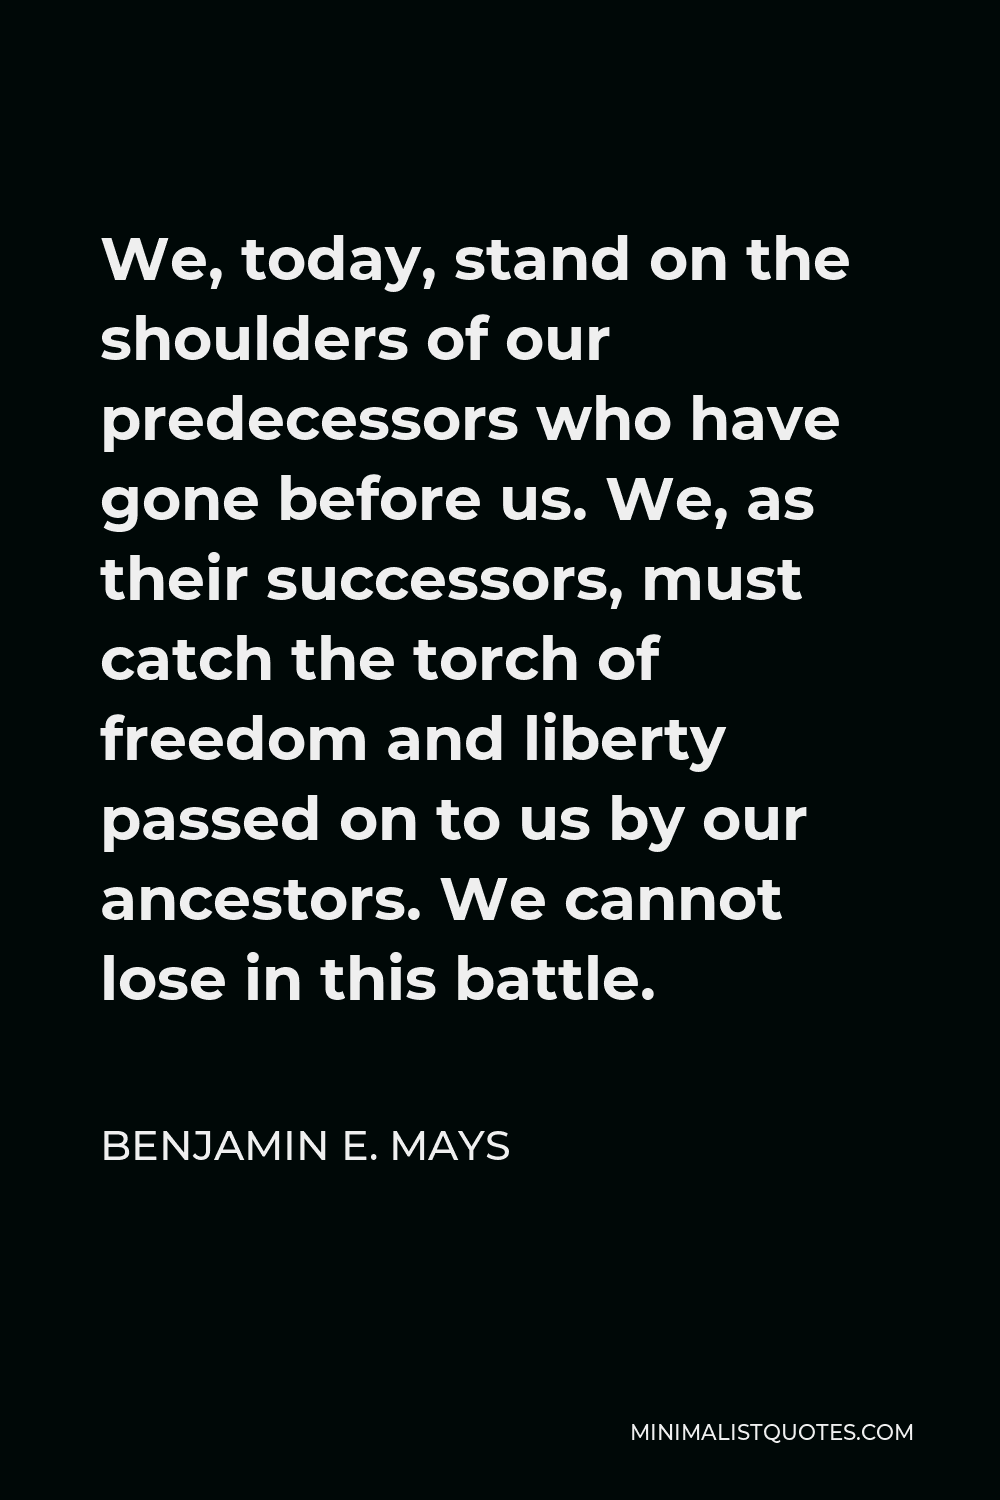 Benjamin E. Mays Quote - We, today, stand on the shoulders of our predecessors who have gone before us. We, as their successors, must catch the torch of freedom and liberty passed on to us by our ancestors. We cannot lose in this battle.